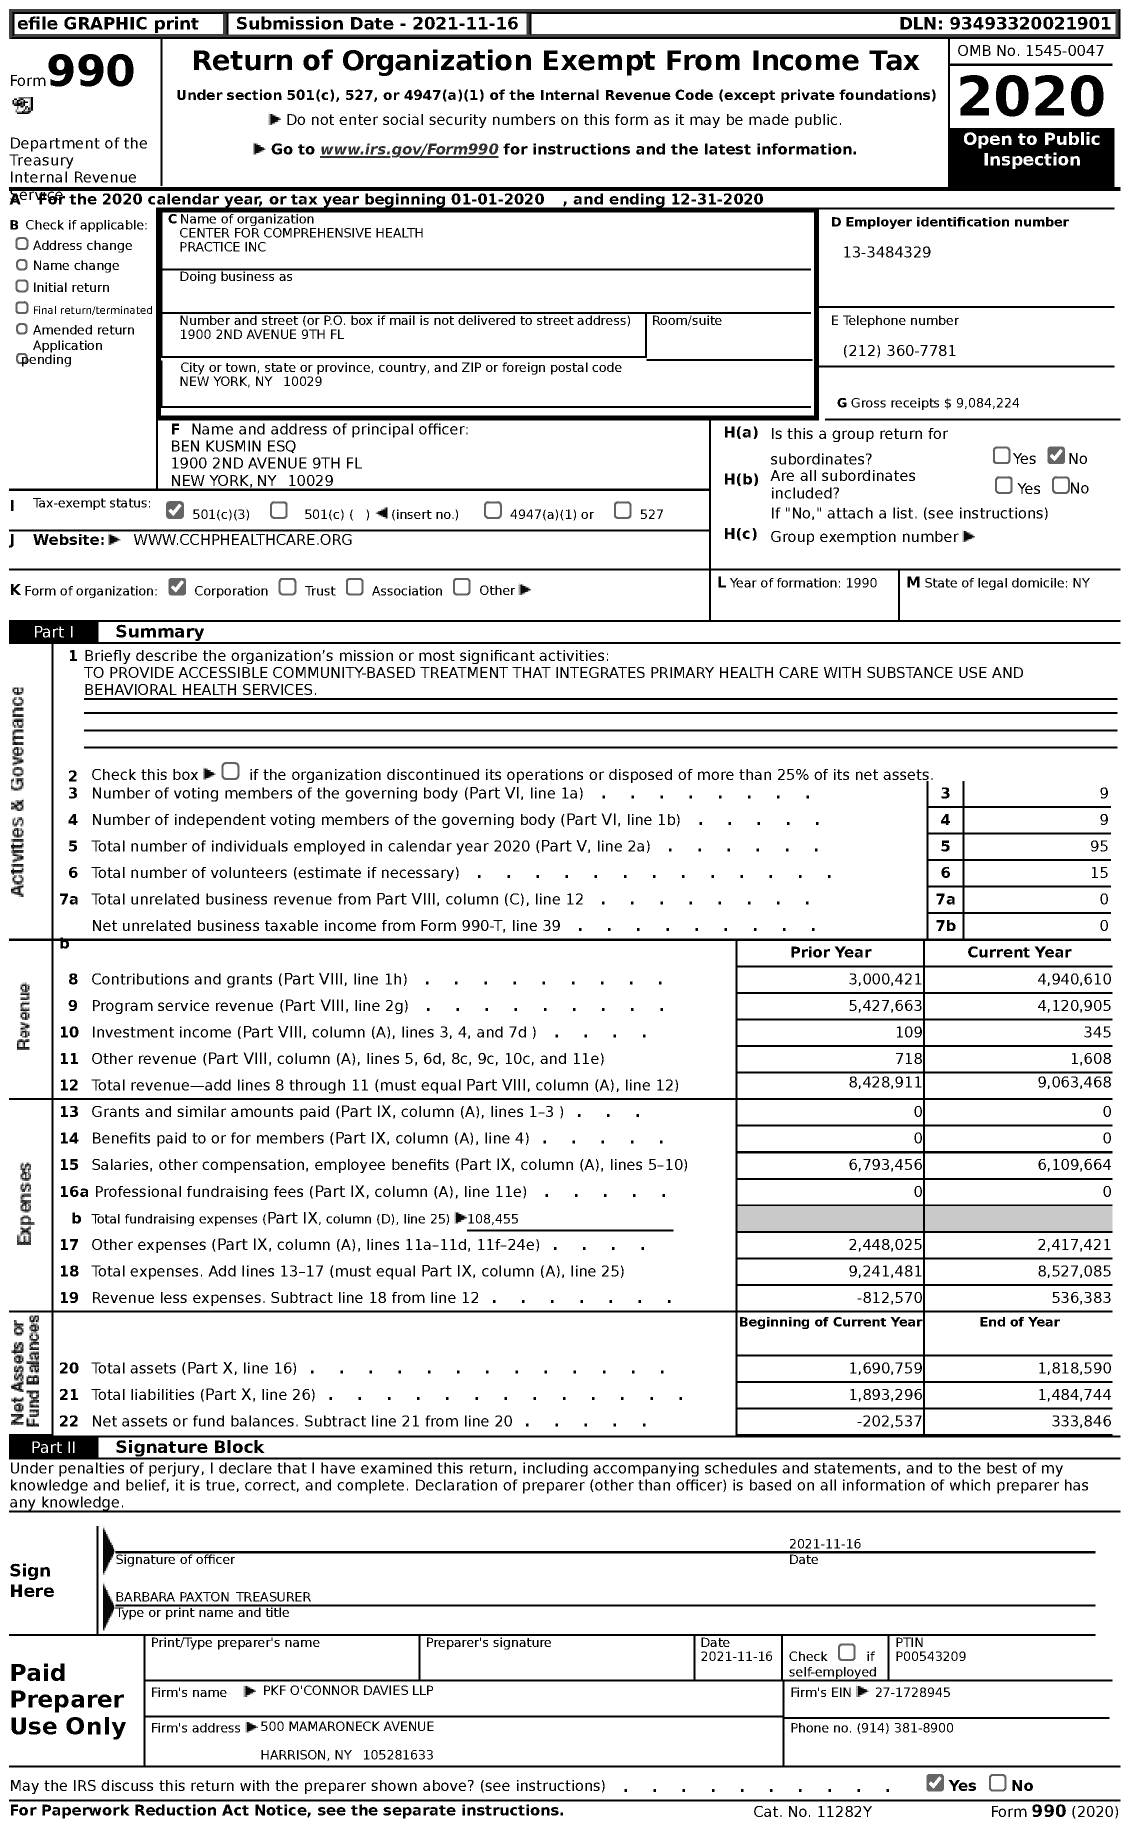 Image of first page of 2020 Form 990 for Center for Comprehensive Health Practice (CCHP)